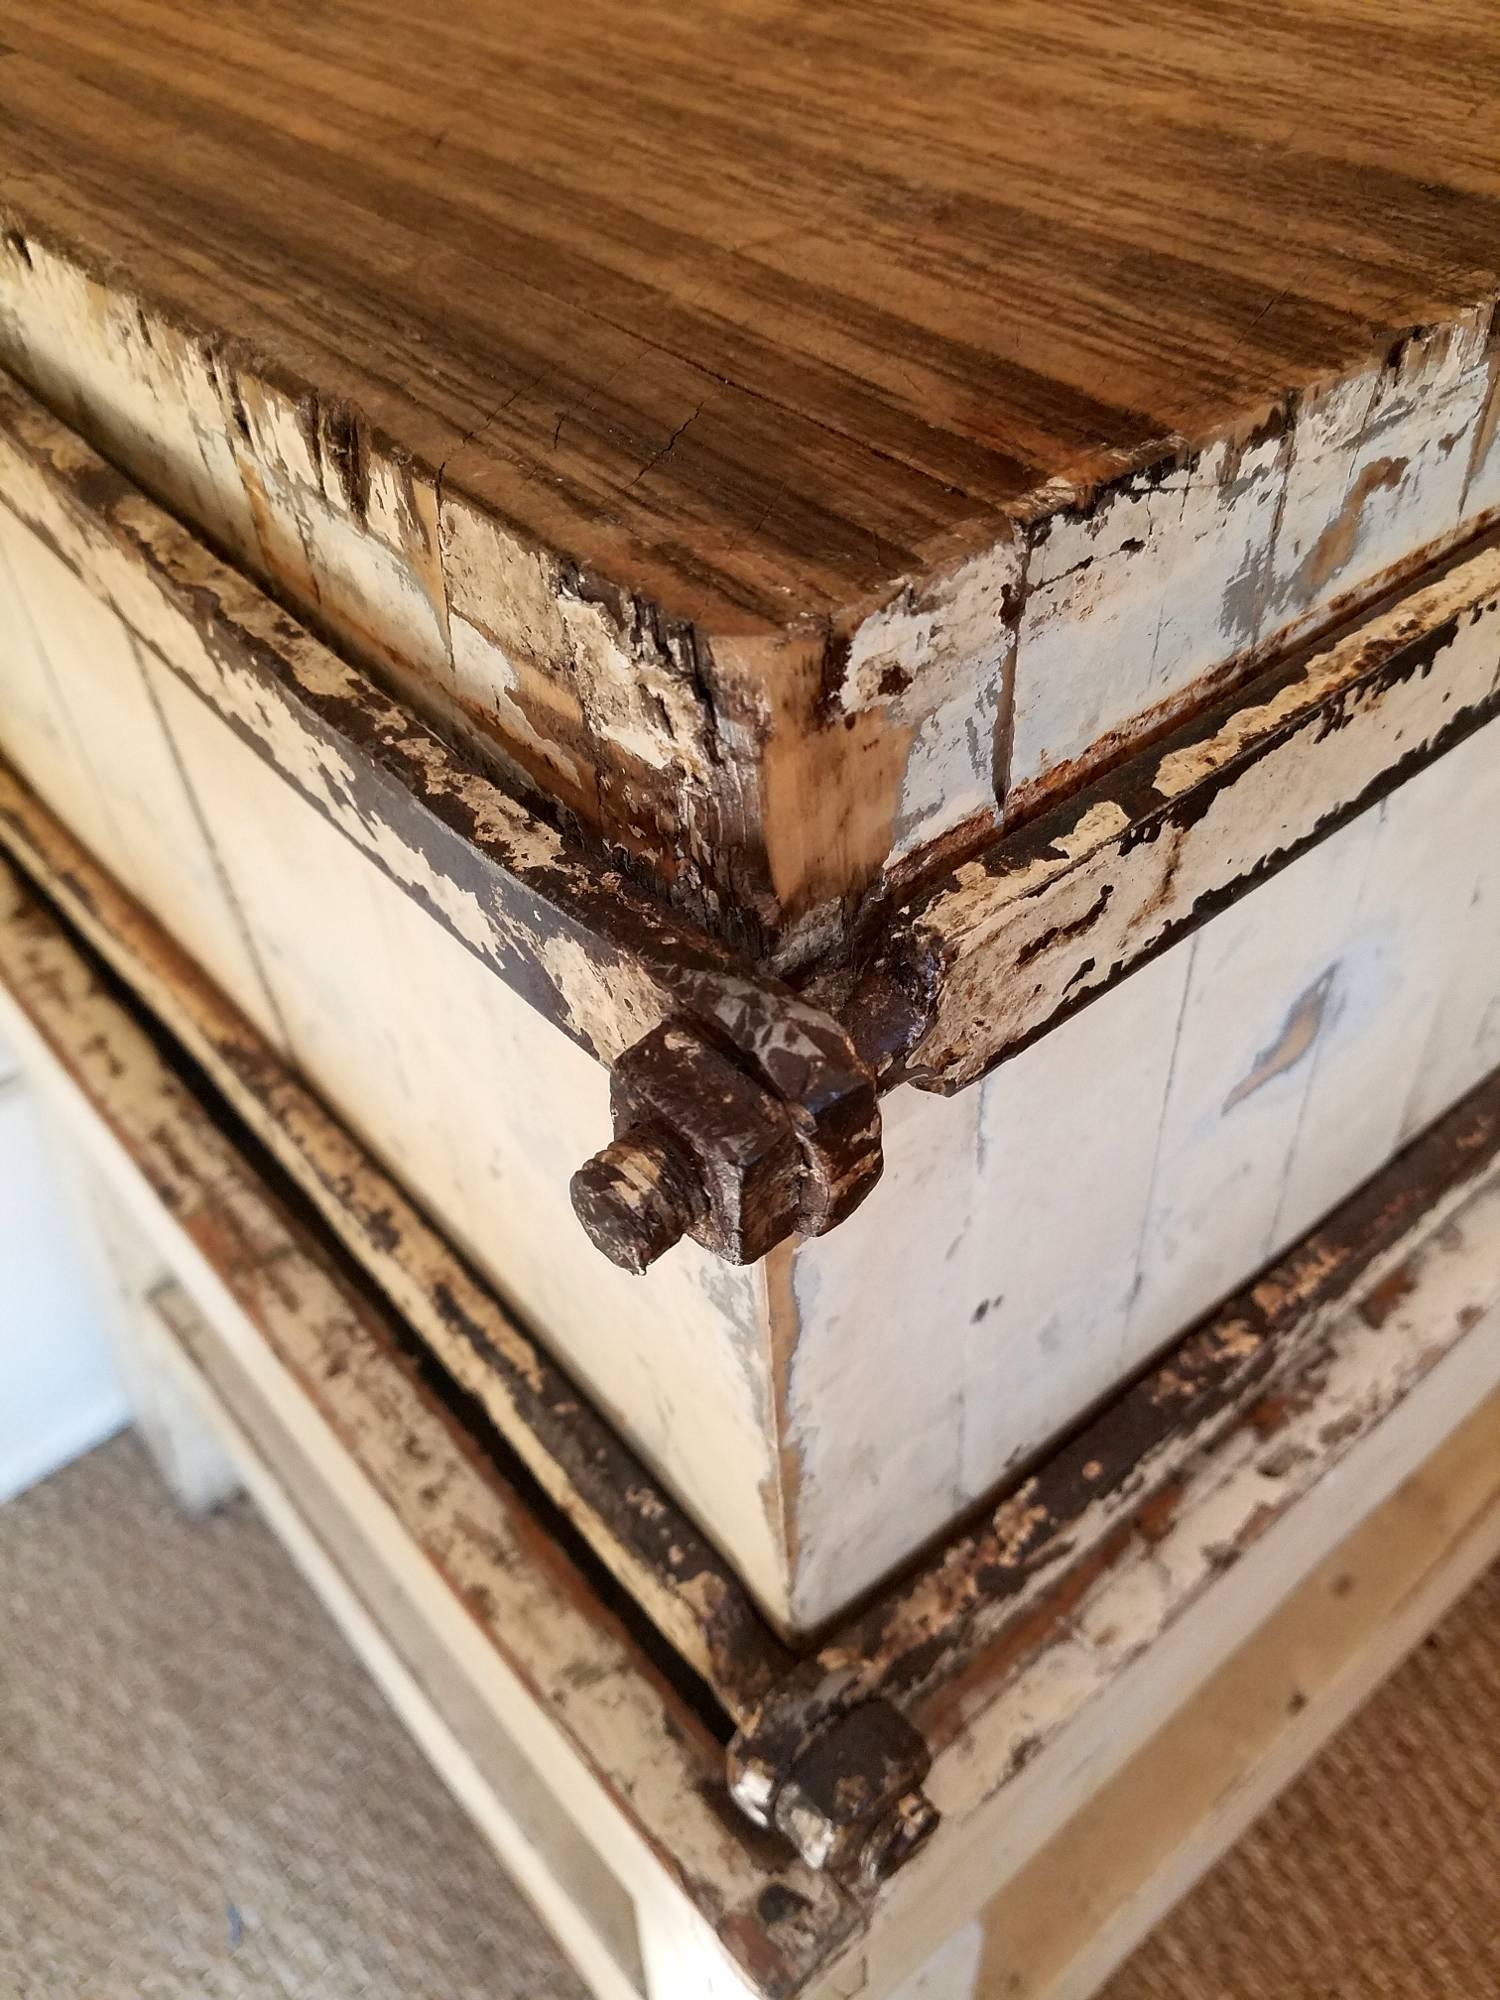 French Sweet Vintage Butcher Block from France, circa 1900